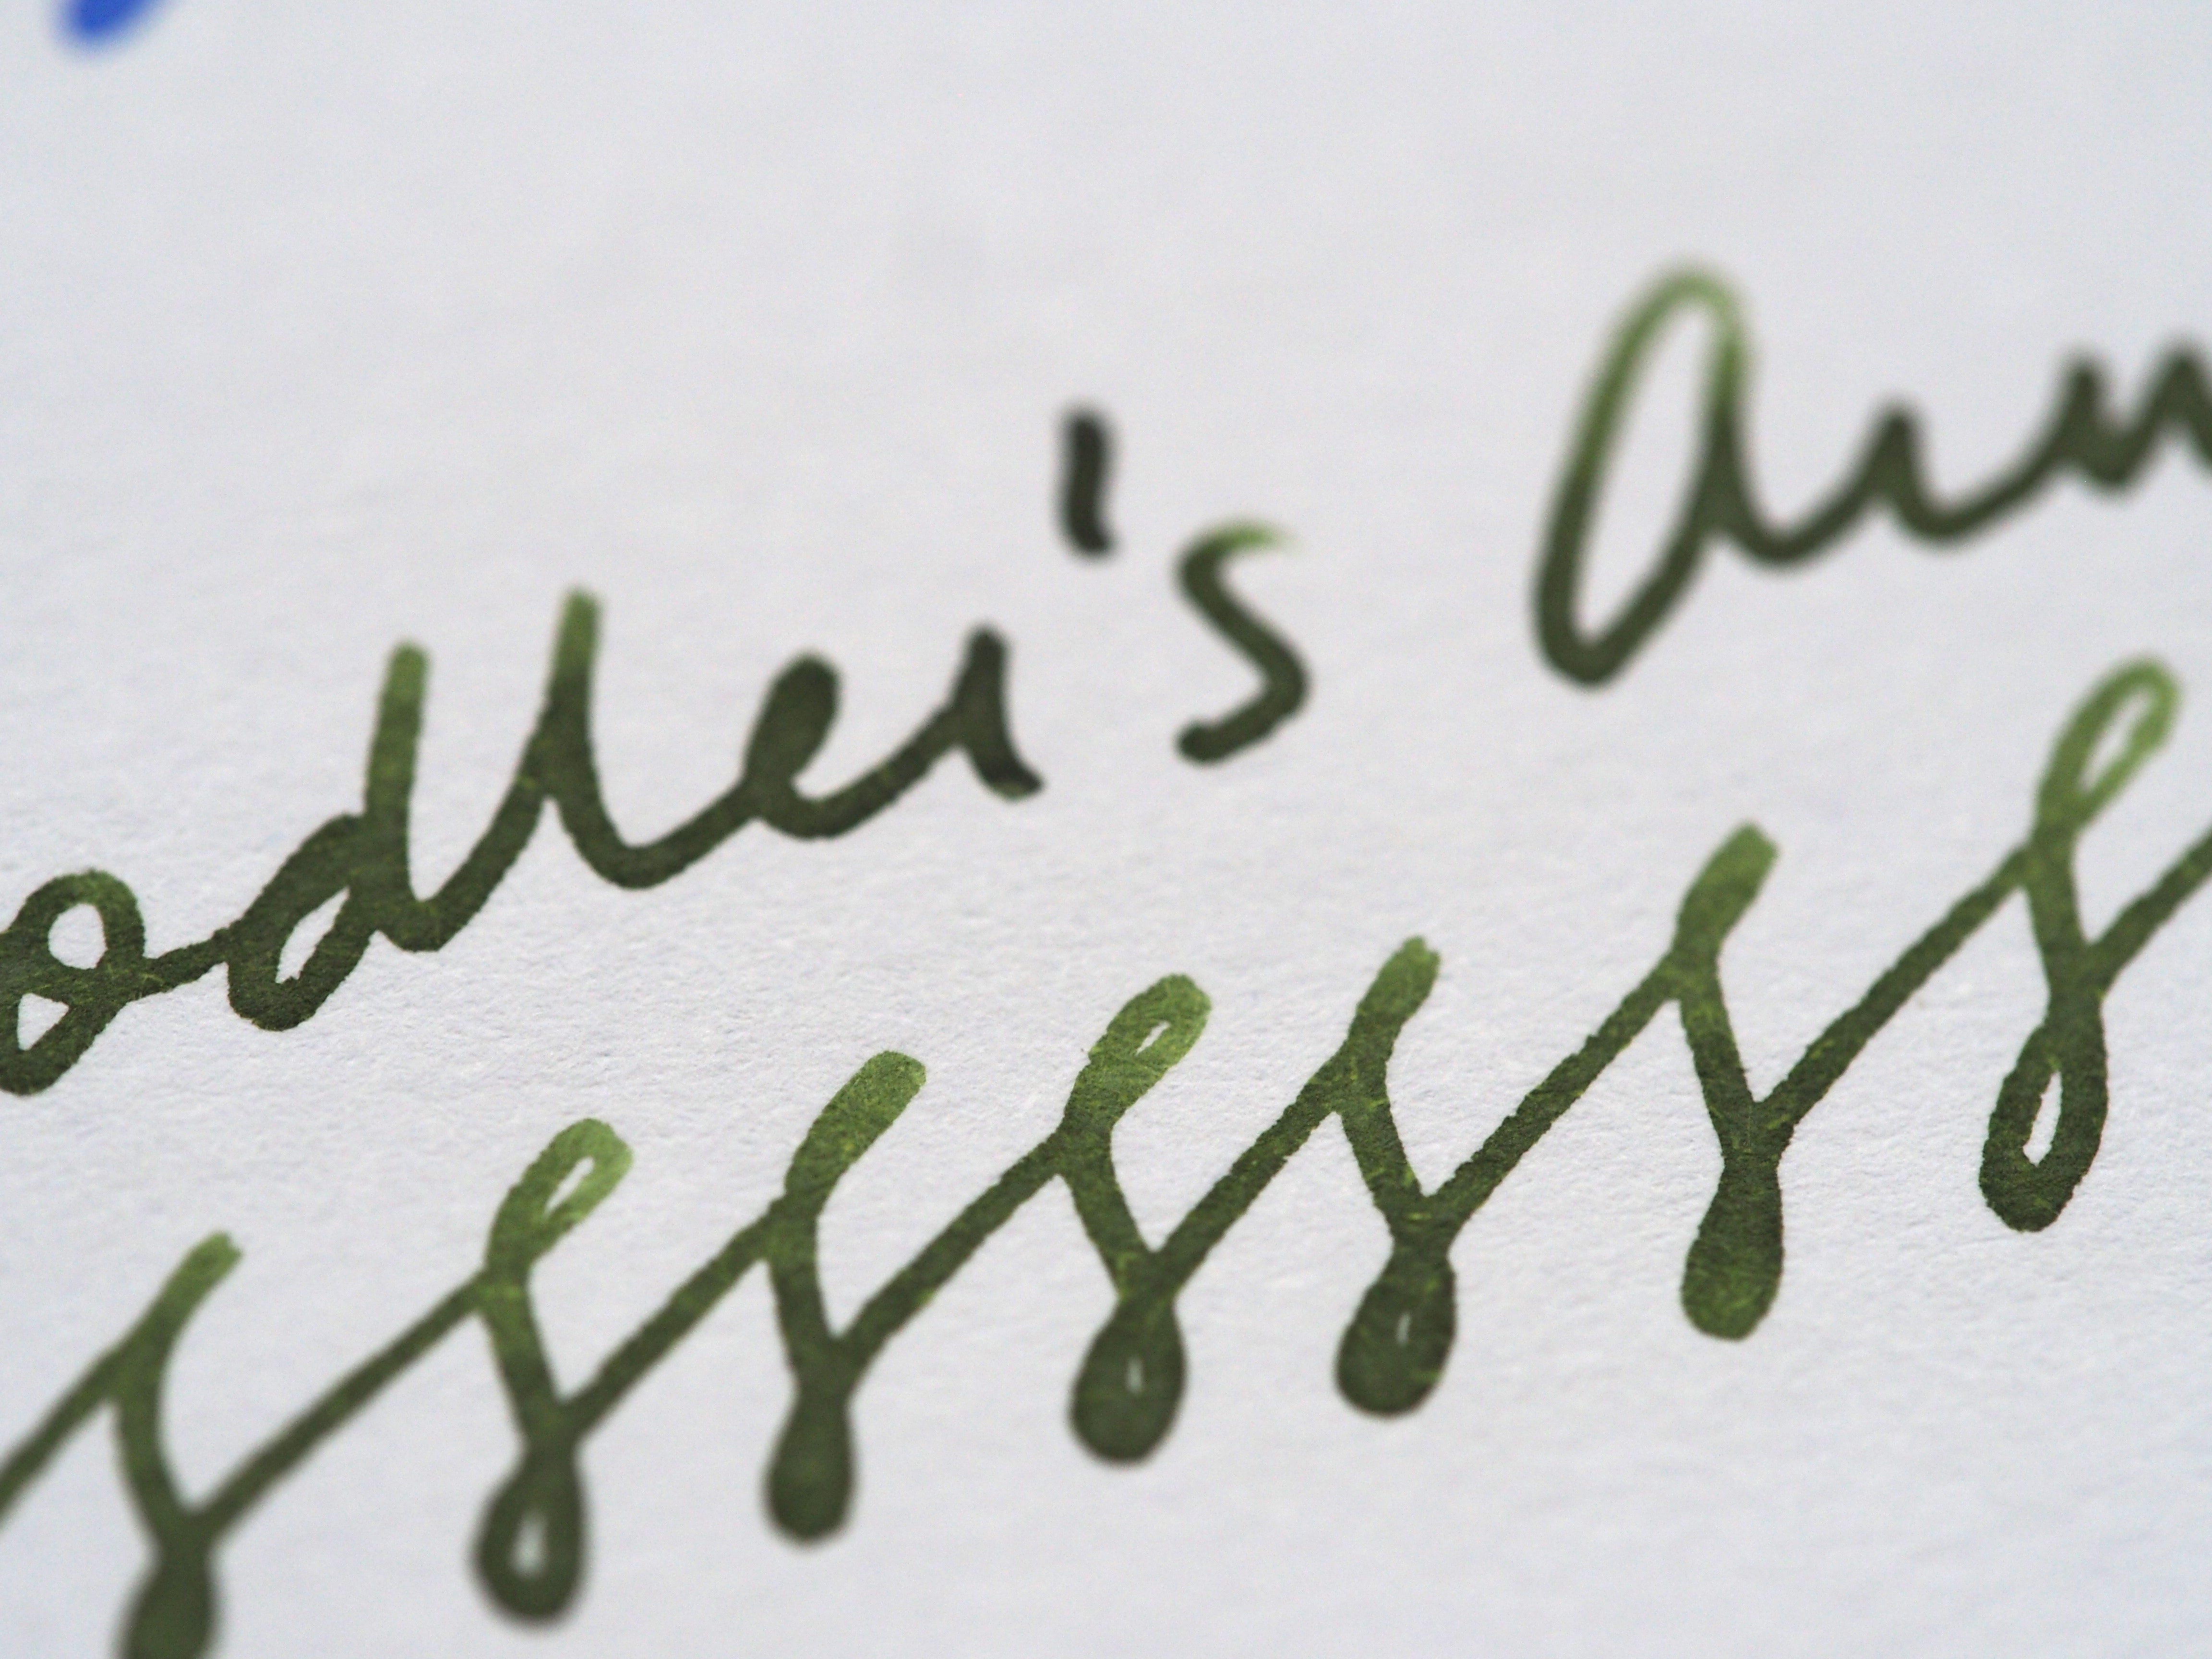 Velin de France with Noodler's Army Green